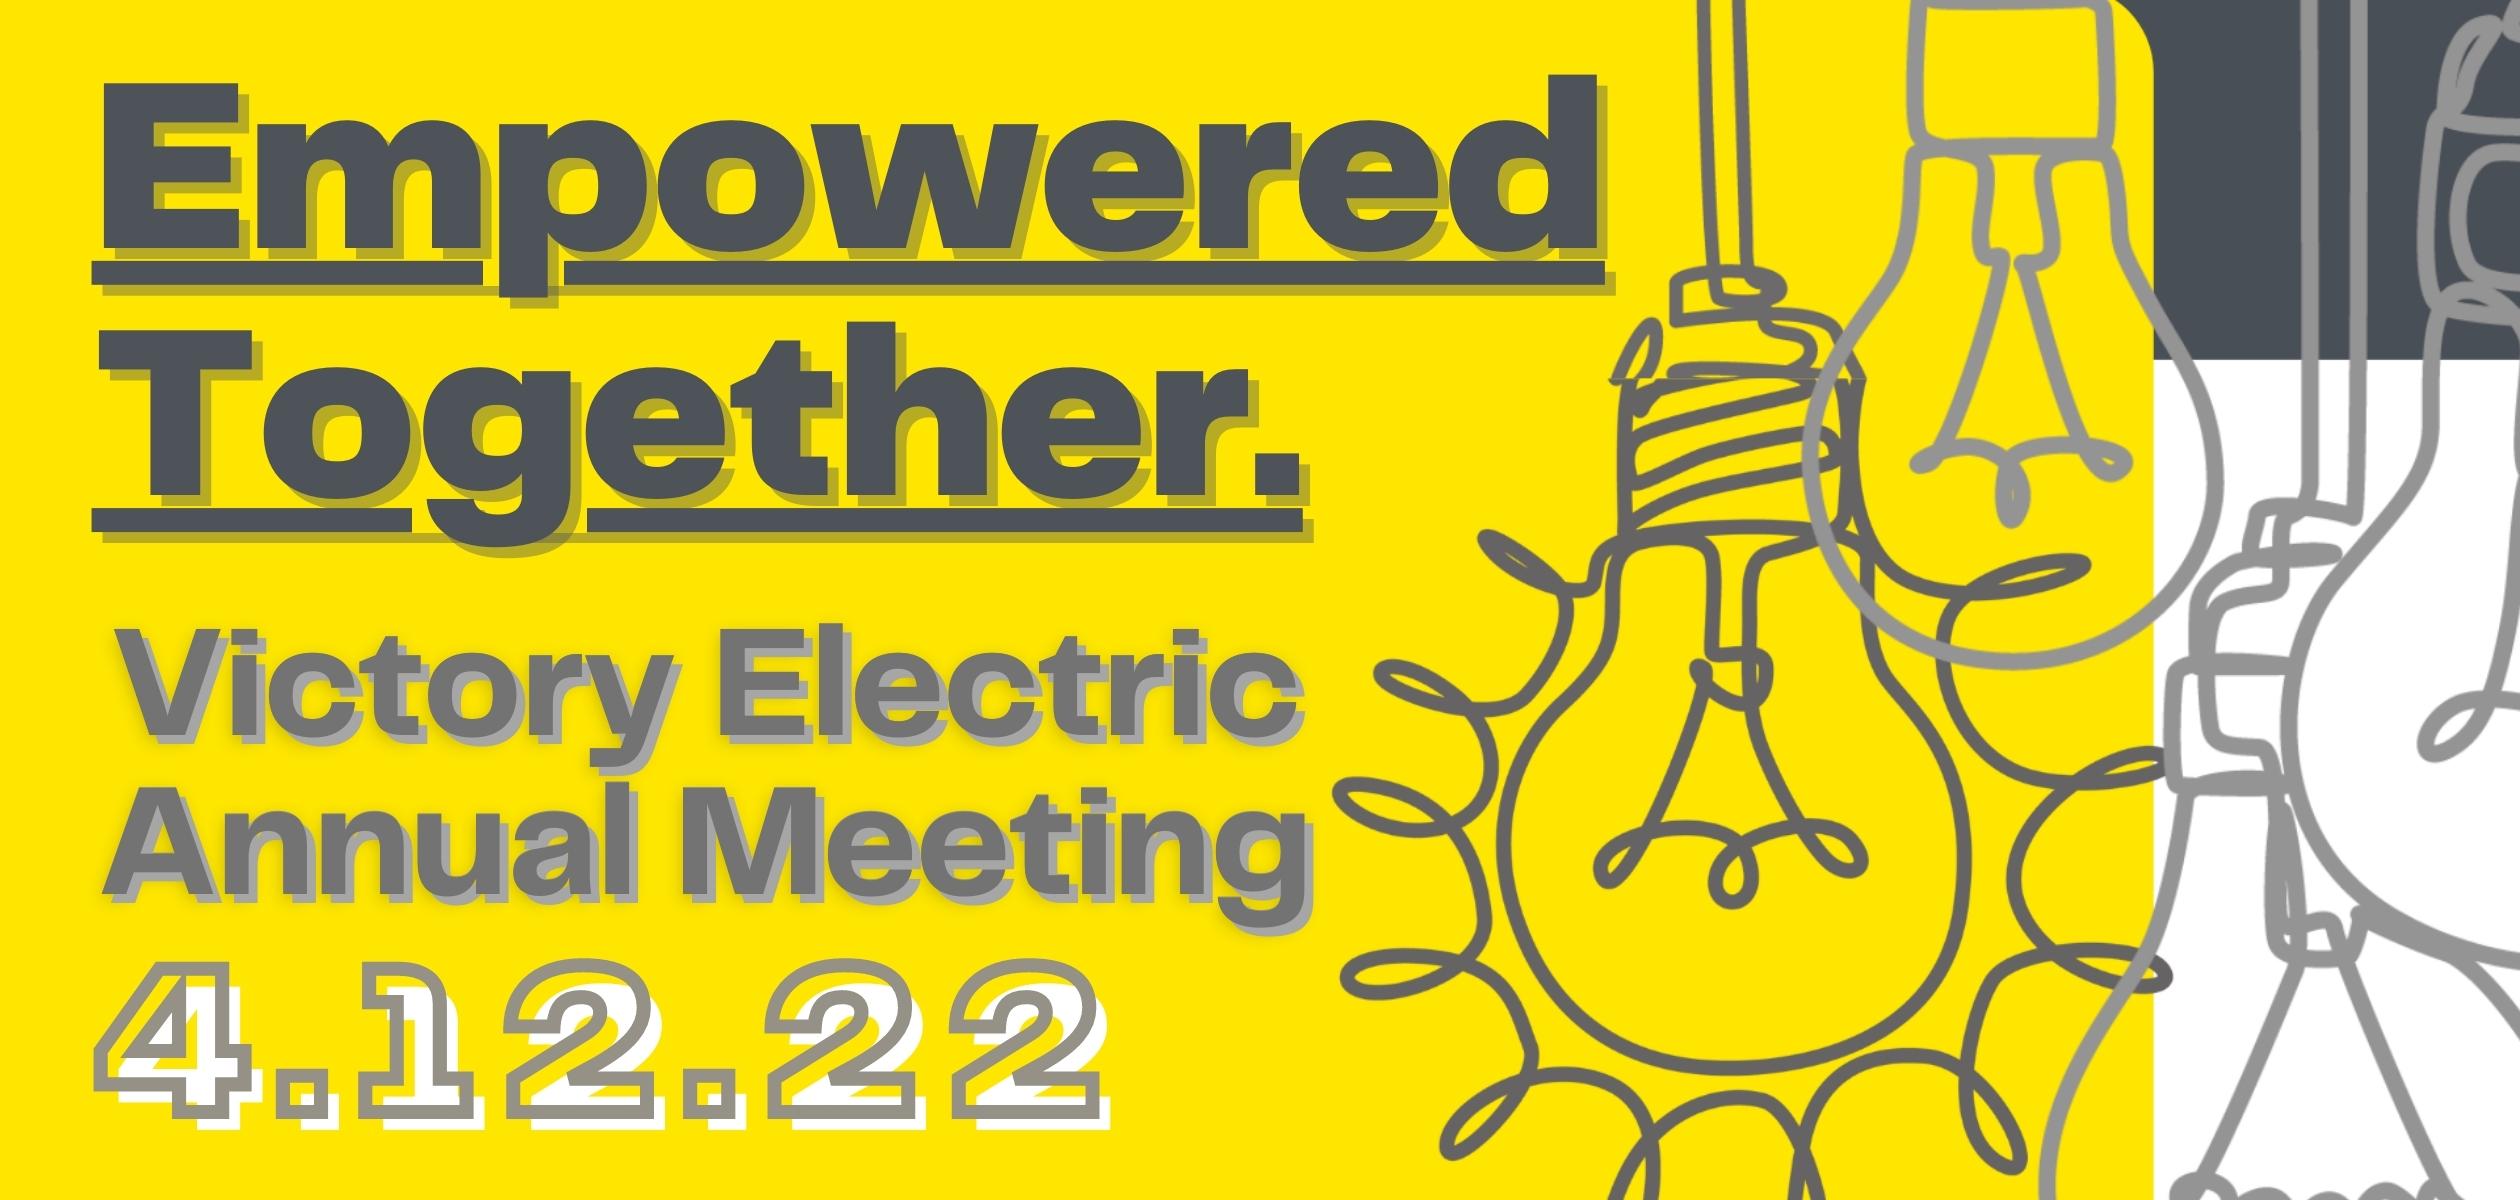 https://www.victoryelectric.net/sites/default/files/revslider/image/2022%20Annual%20Meeting%20Save%20the%20Date%20%281260%20x%20600%20px%29%20%282%29.jpg